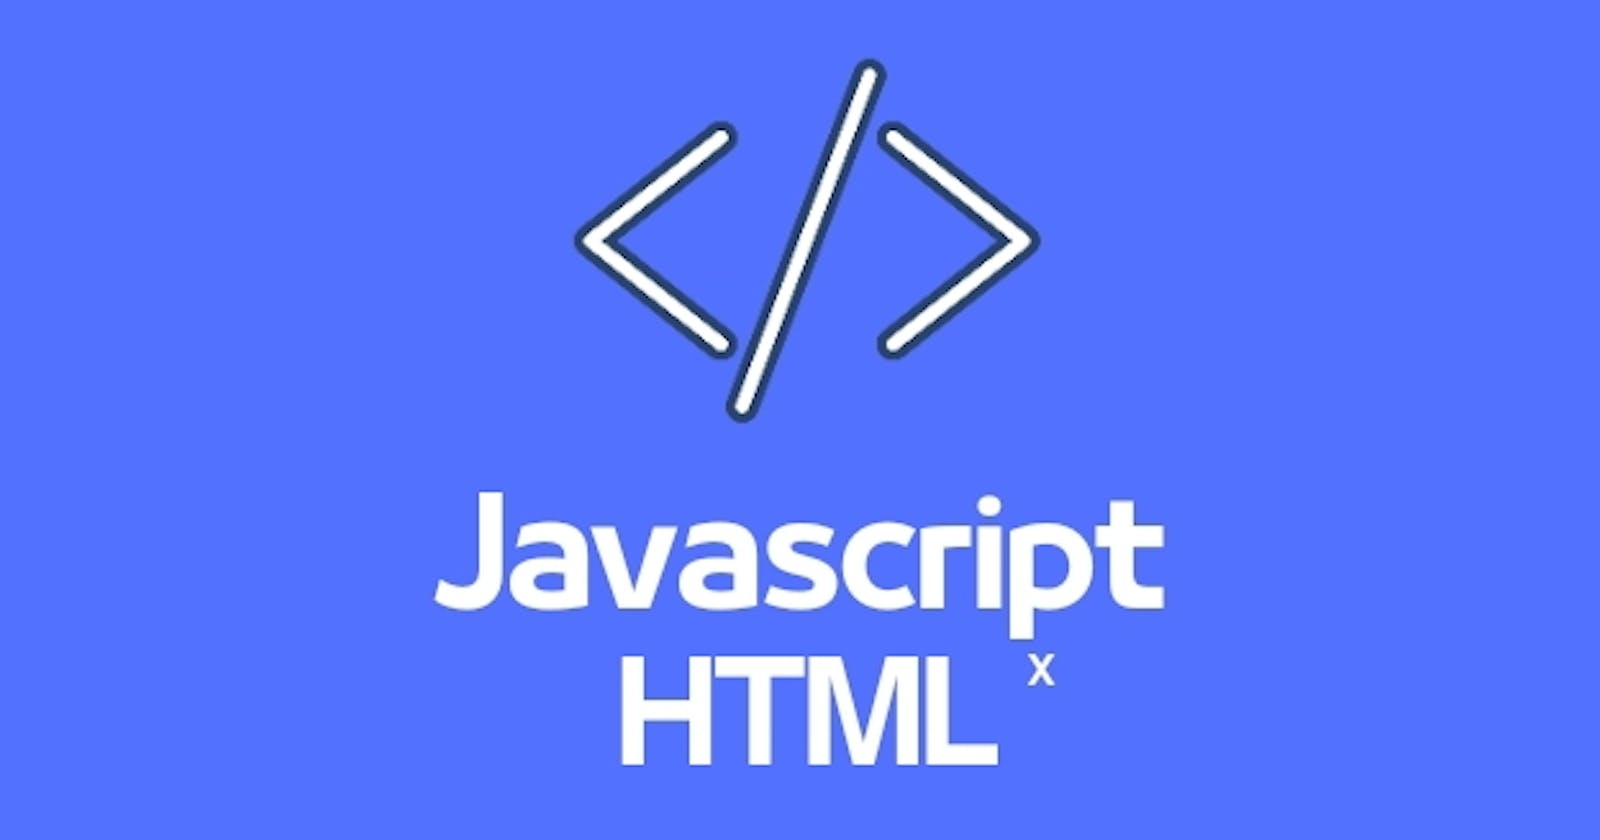 Differentiating JavaScript from HTML.